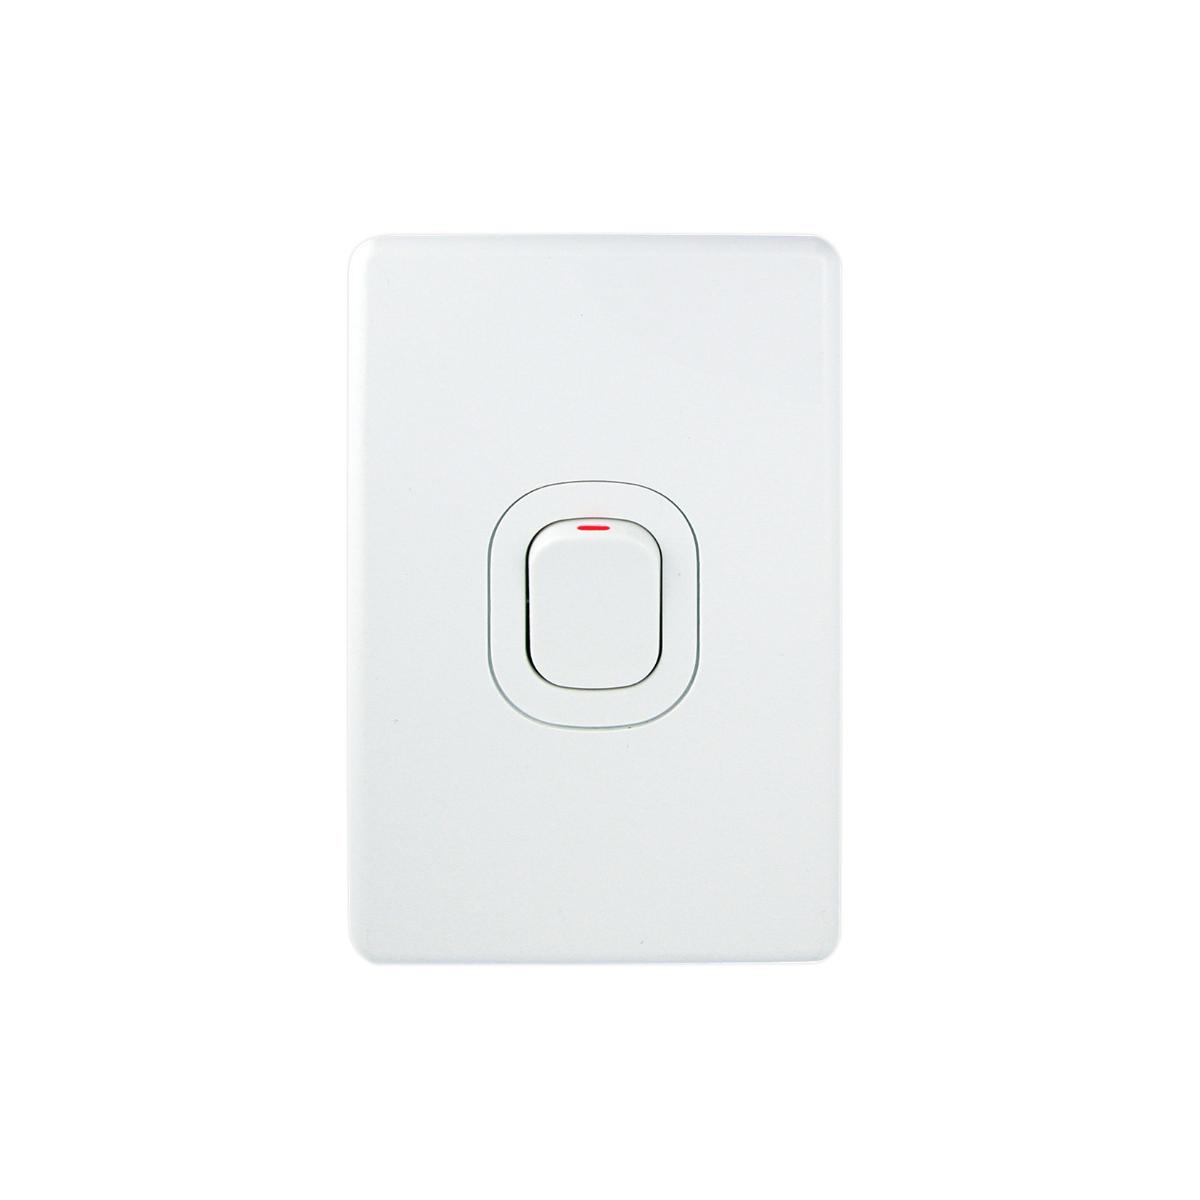 C2000 COOKER SWITCH 45A S/P WHITE